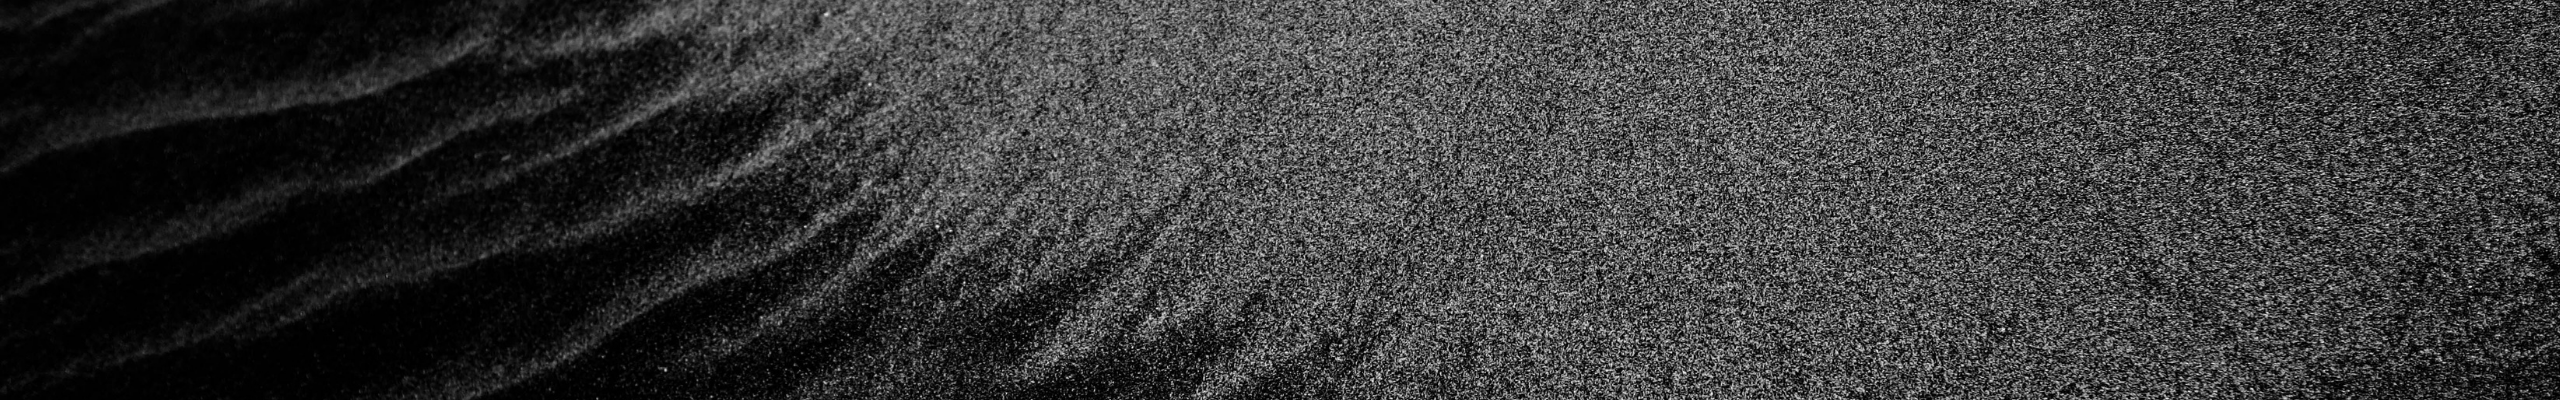 black and gray sand